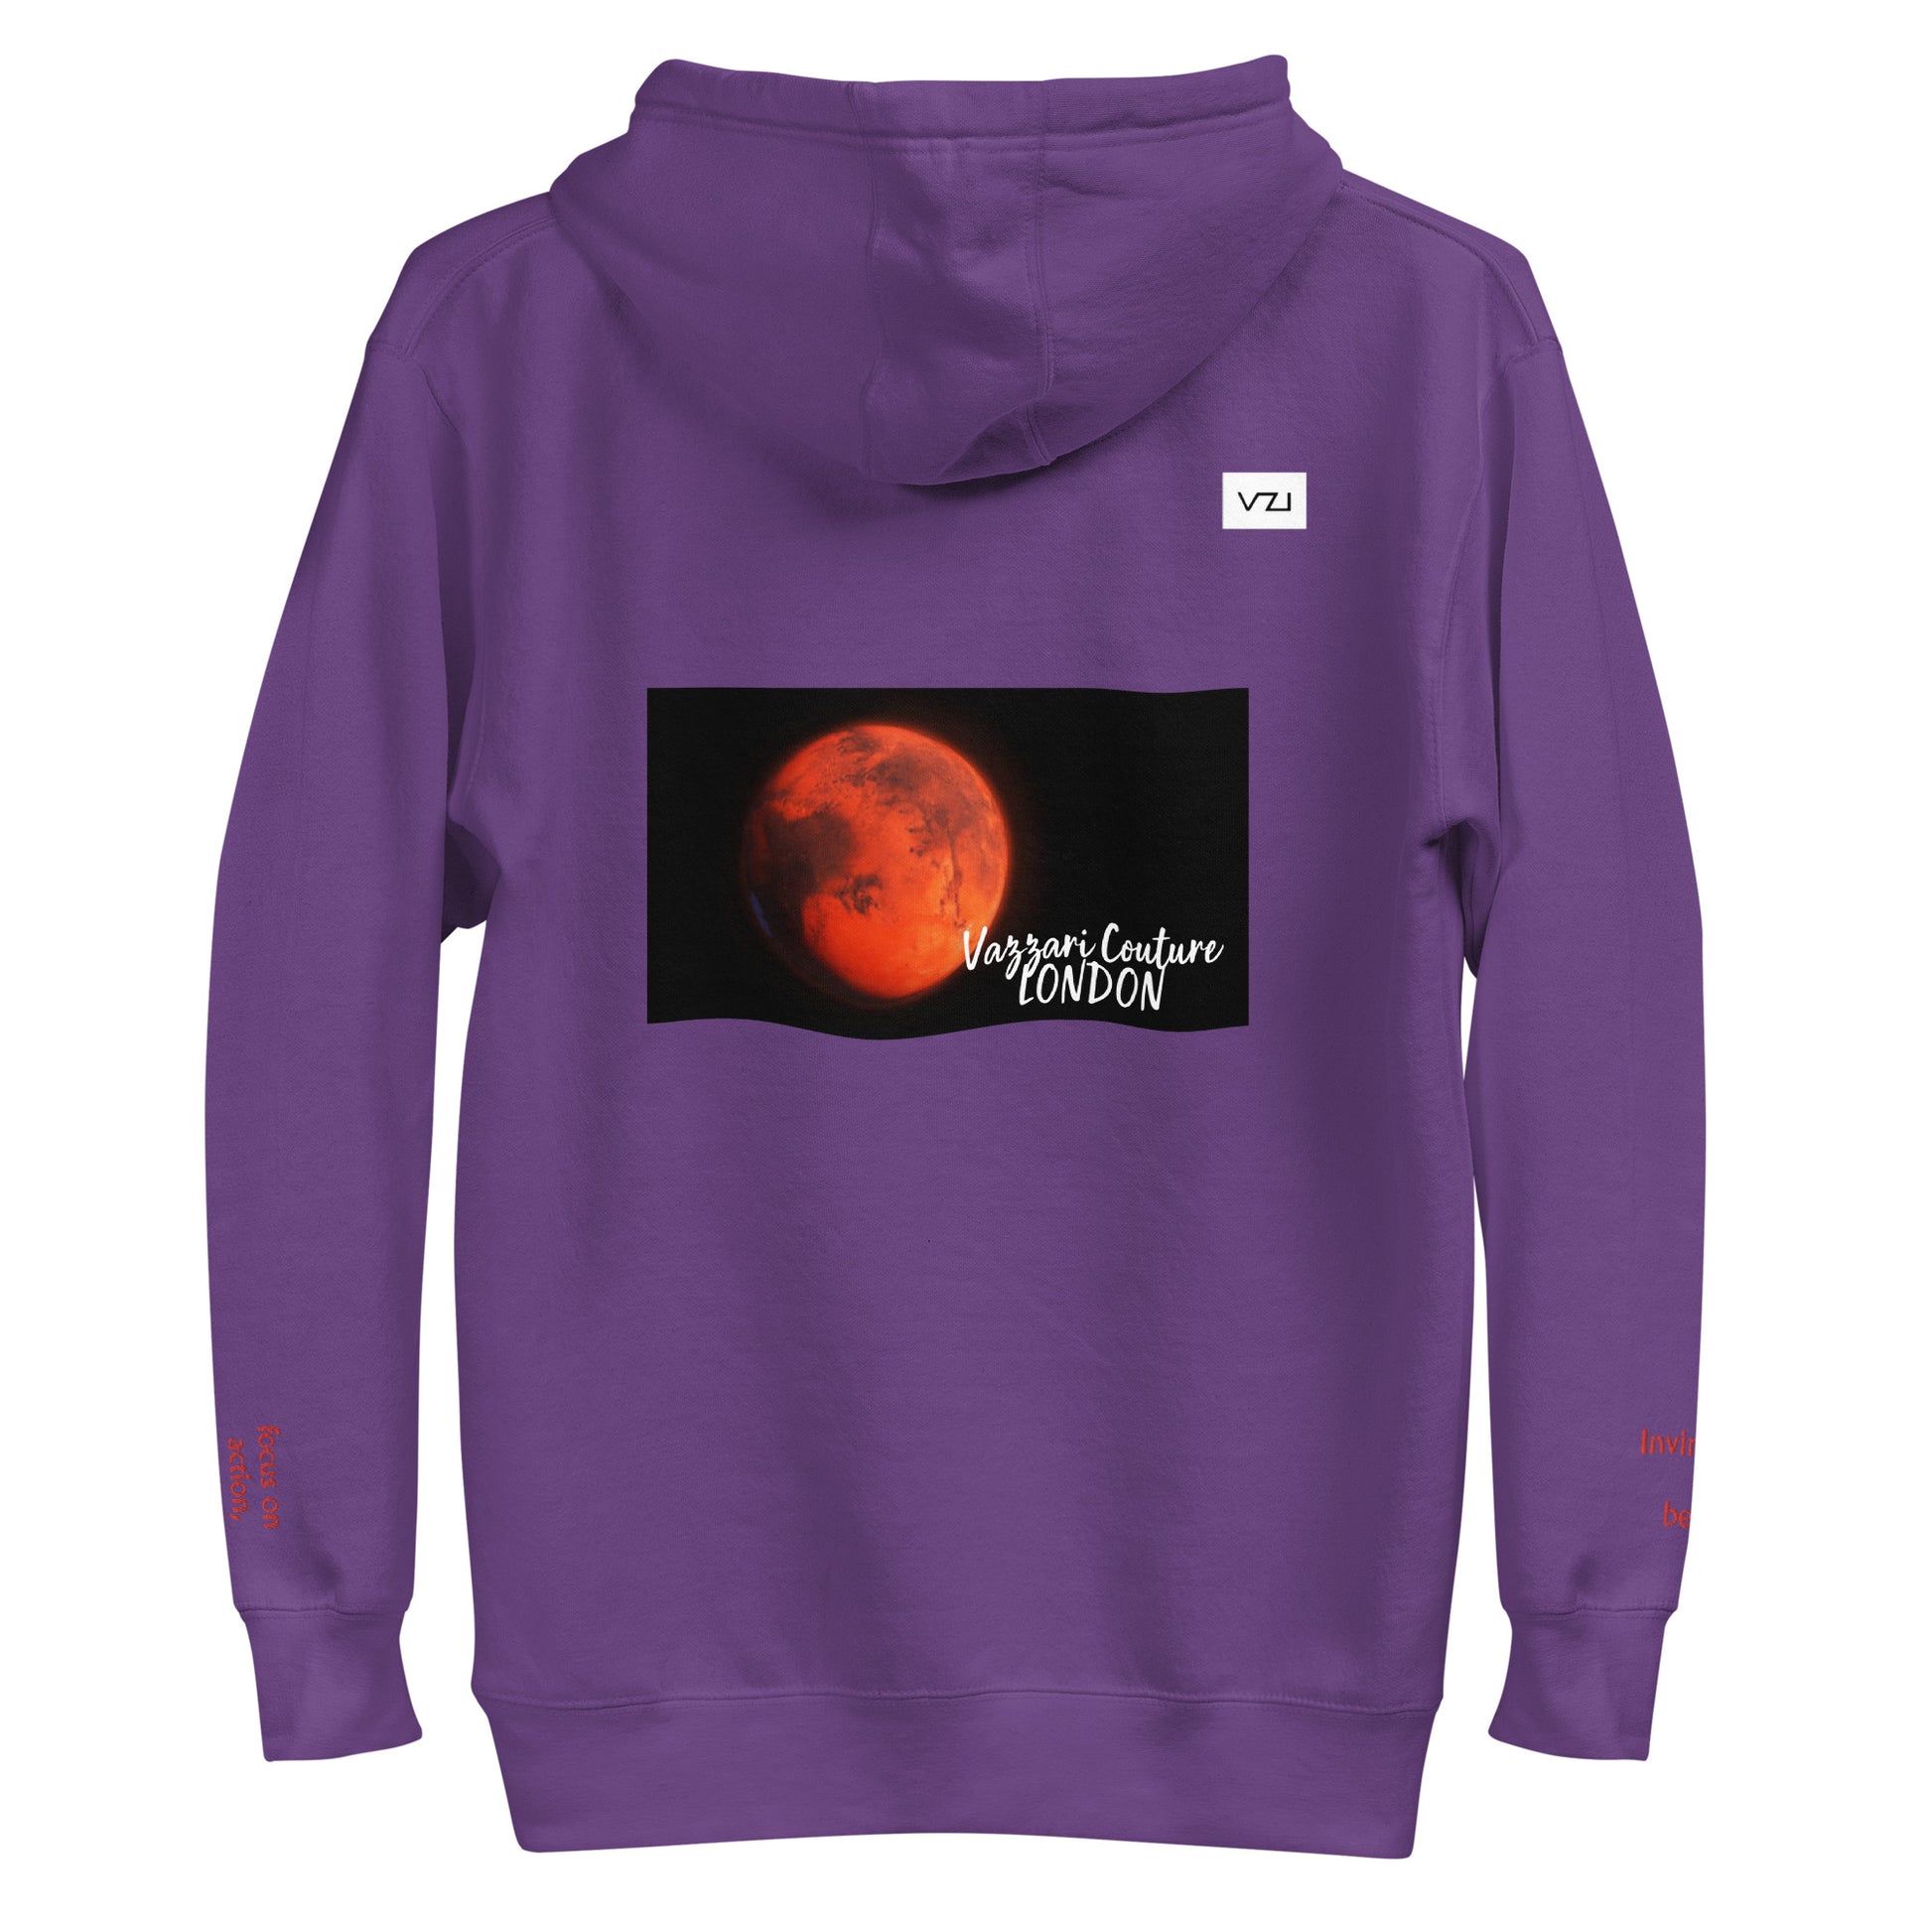 BACK PURPLE HOODIE VZI Marsiva Unisex Hoodie - Classic Cotton for Action, Strength, and Power